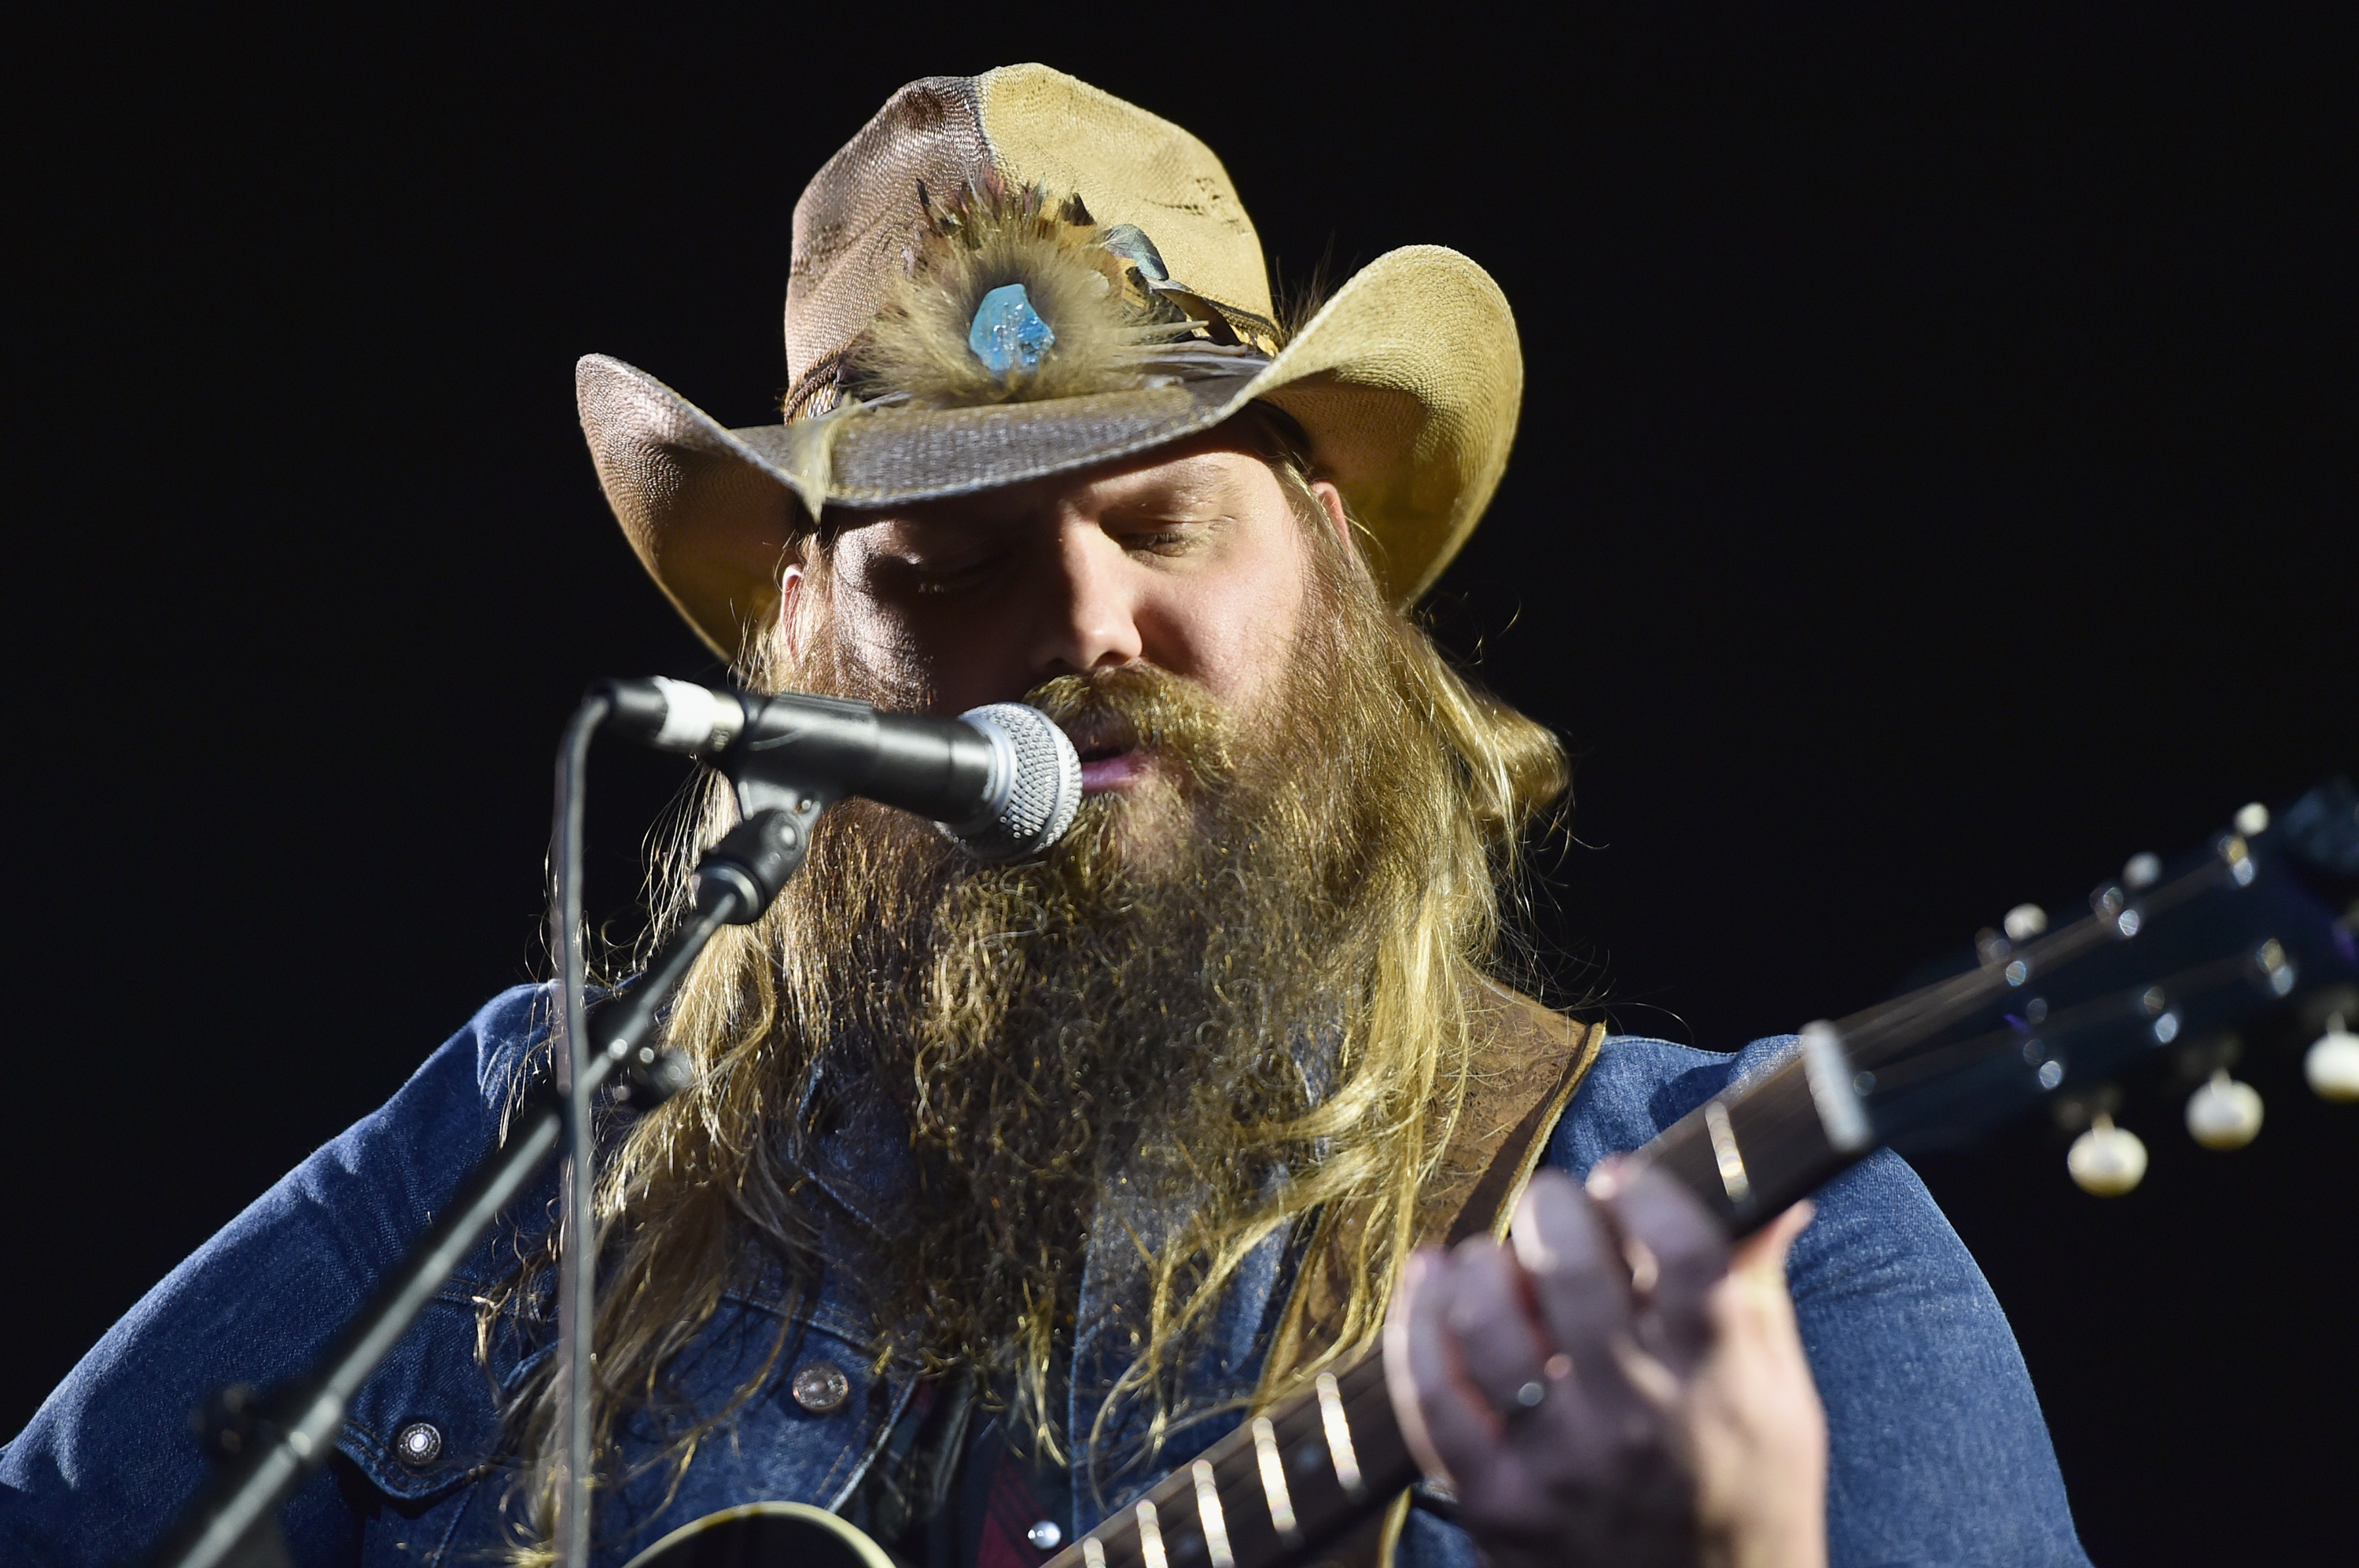 If You Had Tickets To A Postponed Chris Stapleton Concert Here In California You Can Get Into Our Listener Appreciation Concert (LAC) Free!